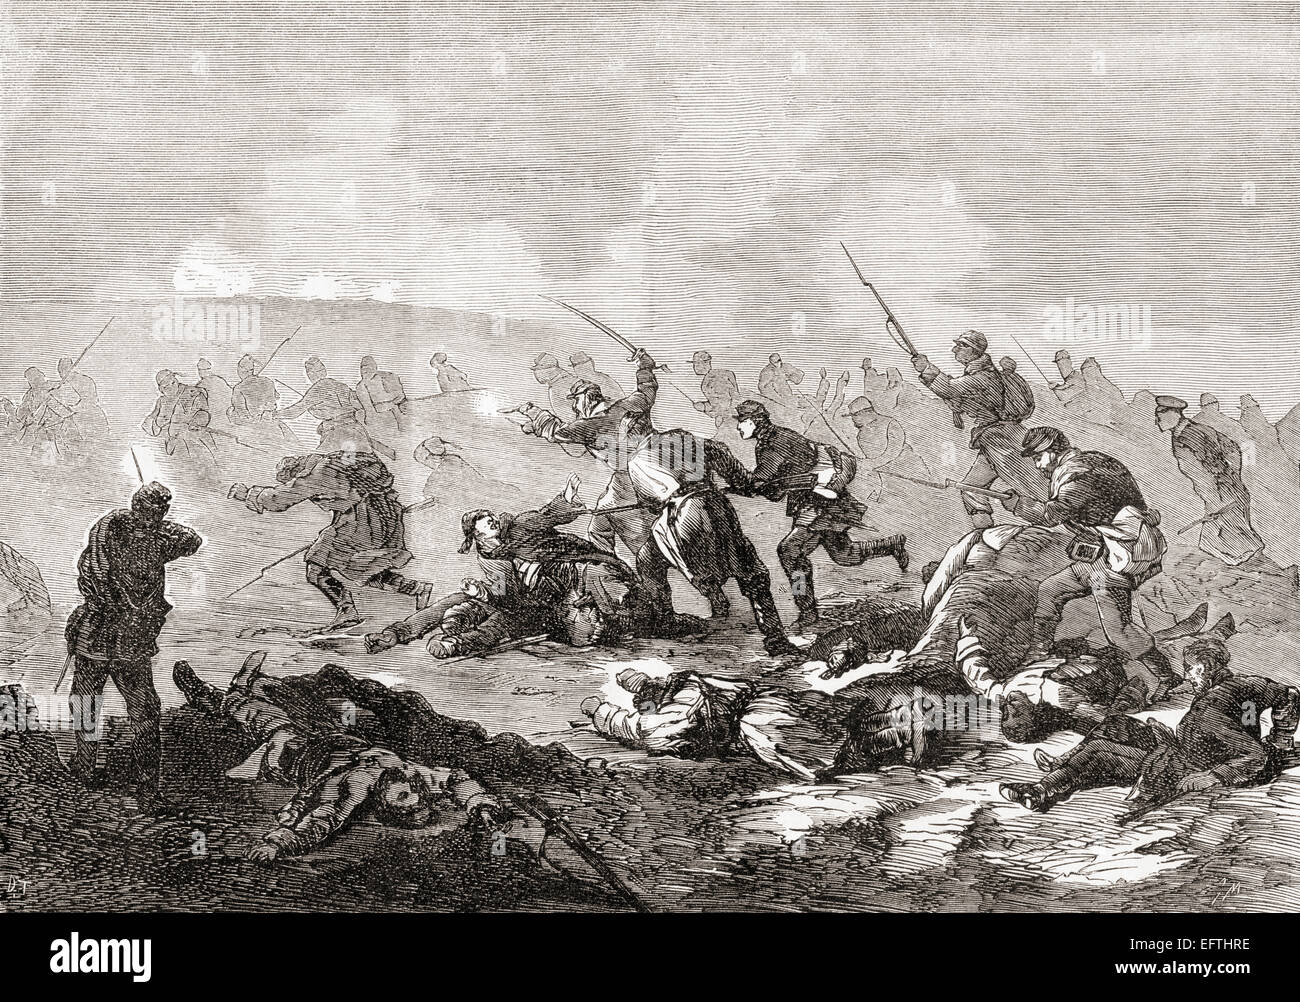 The taking of the Grivitsa redoubt by the Russians during the Third Battle of Grivitsa, Bulgaria.  One of the key battles of the Russo-Turkish War of 1877–1878. Stock Photo